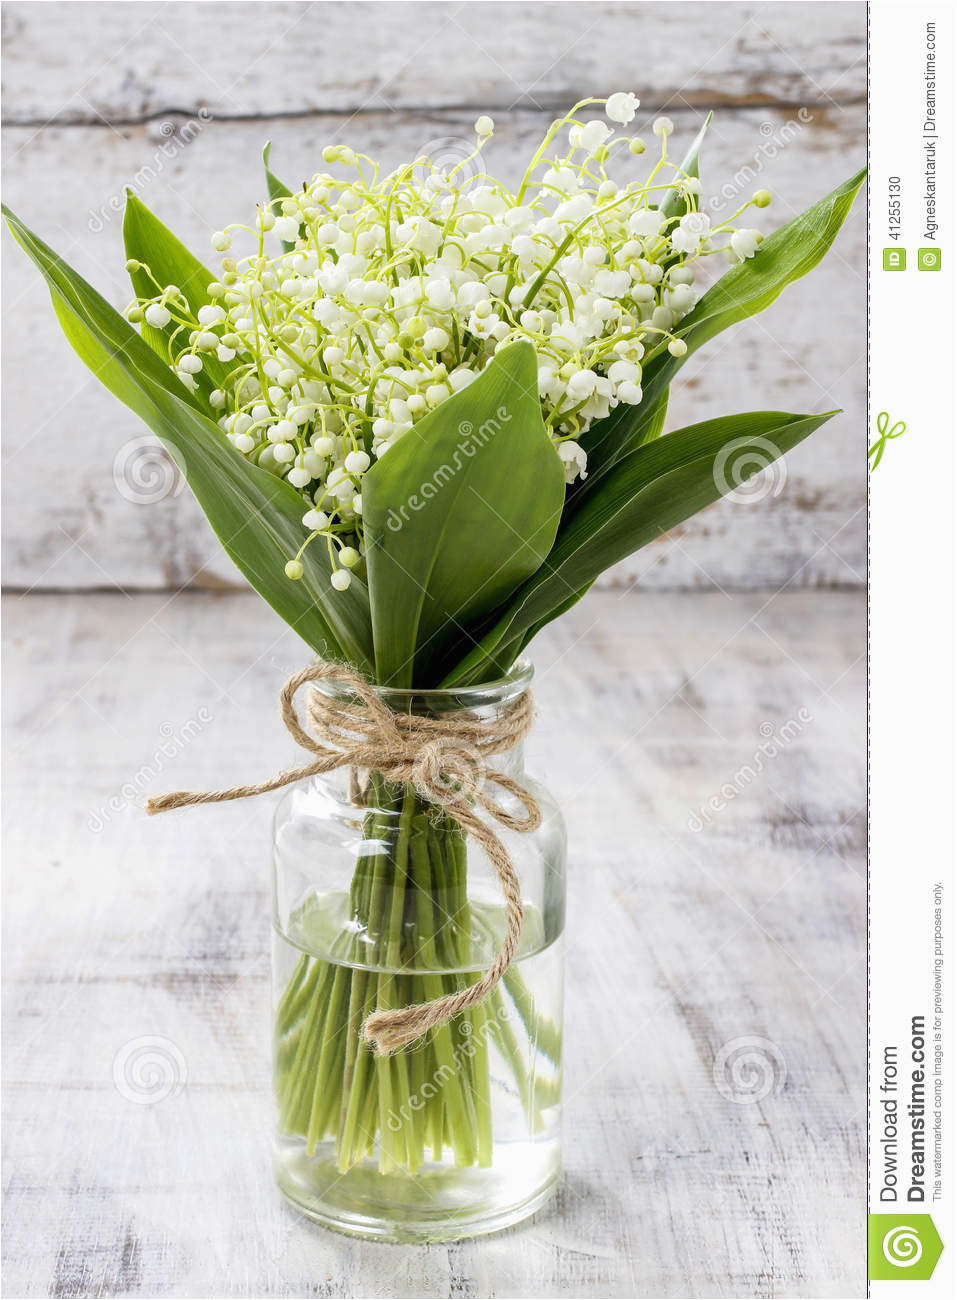 bouquet of lily of the valley flowers stock photo image